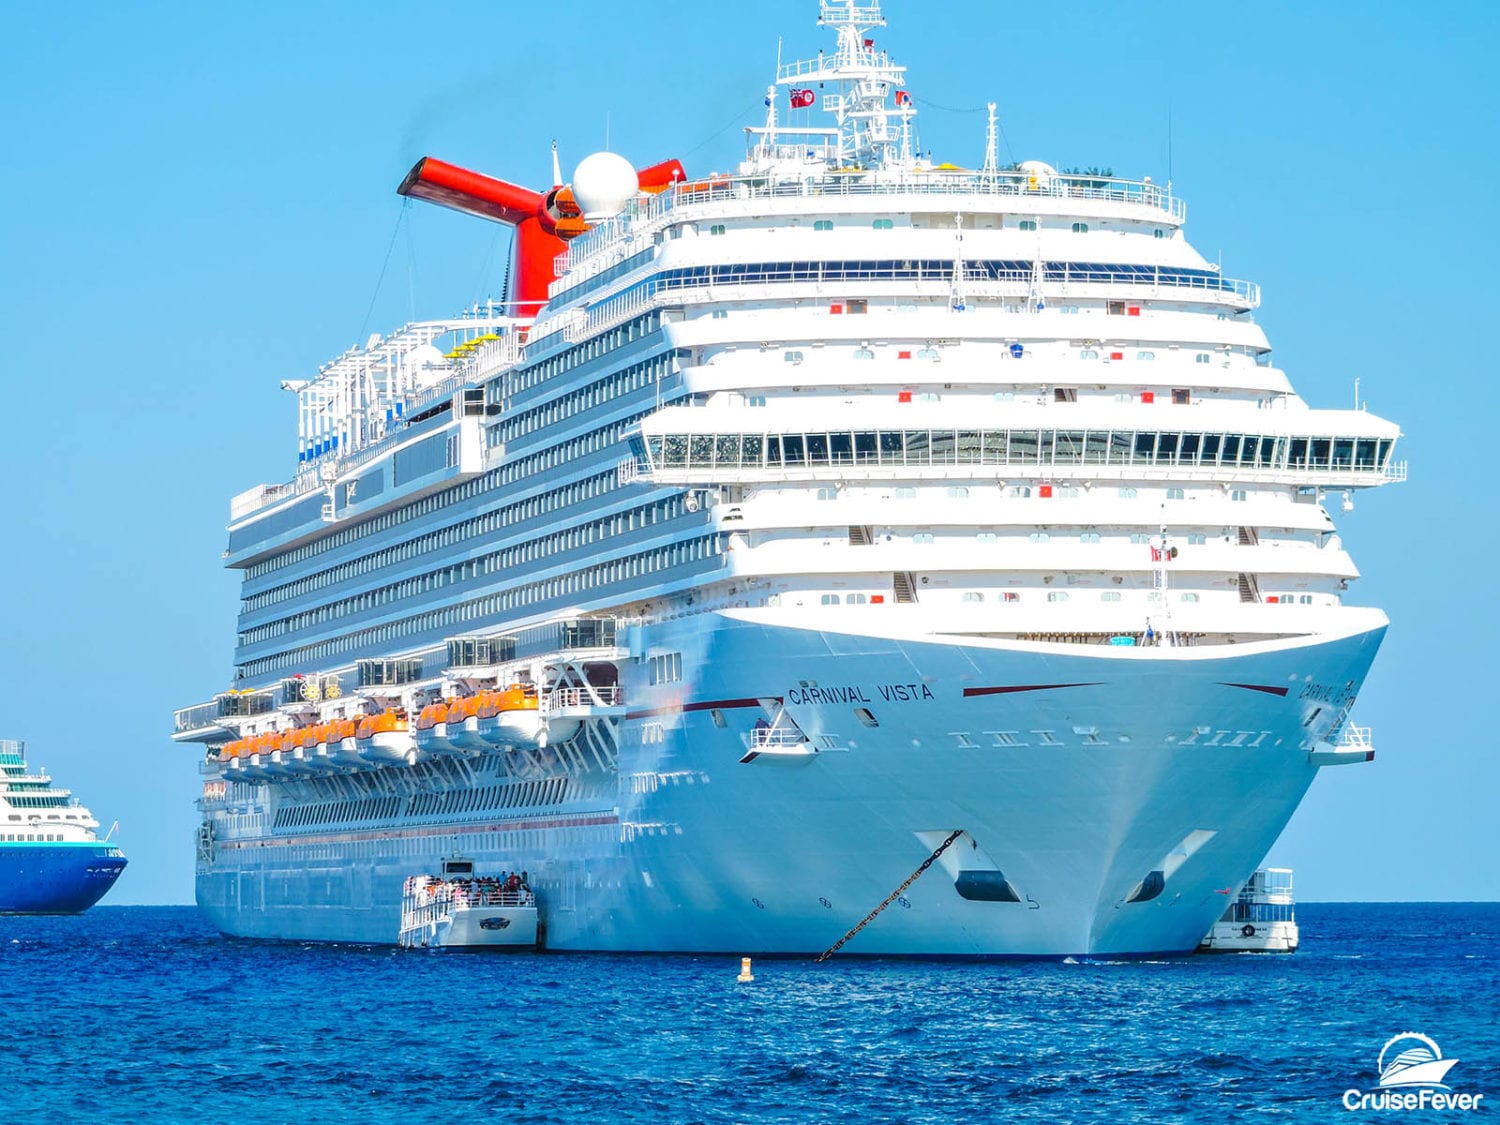 Carnival Cruise Line Brings Back Their Popular 48 Hour Sale on Cruises